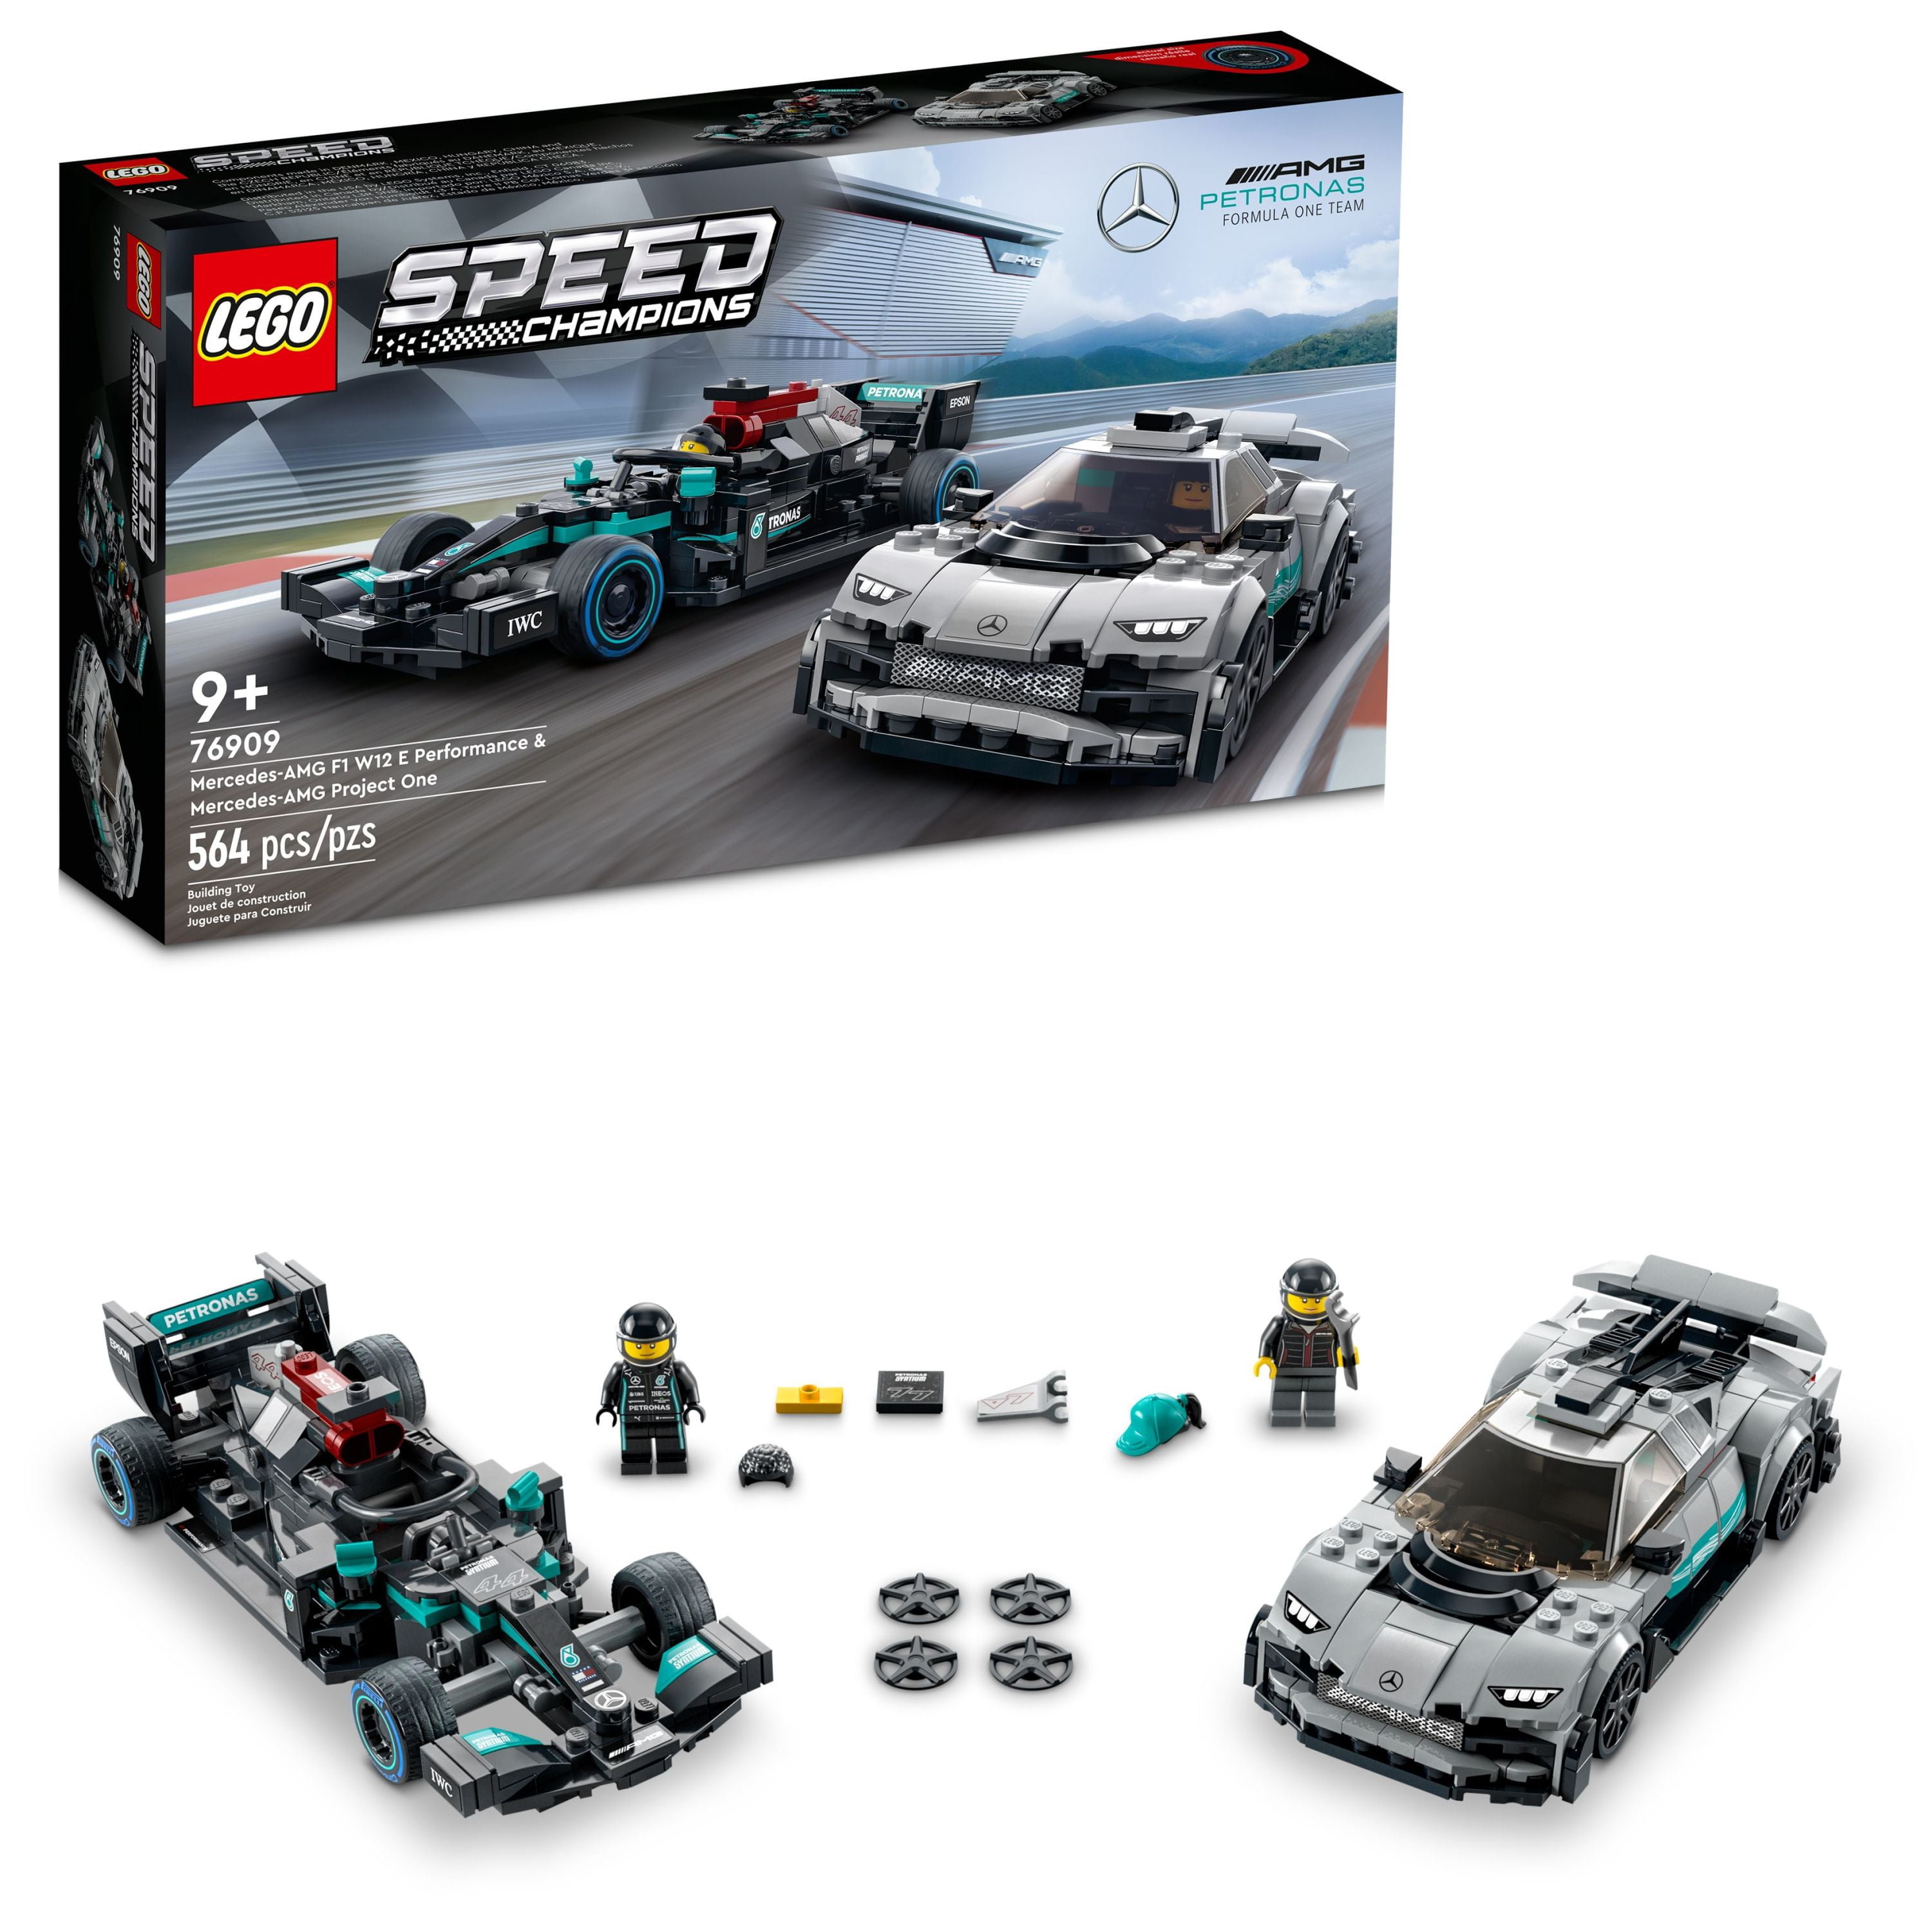 LEGO Speed Champions Mercedes-AMG F1 W12 E 76909 Performance & Project One 2 Car Models Set, Collectible Toy Race Cars